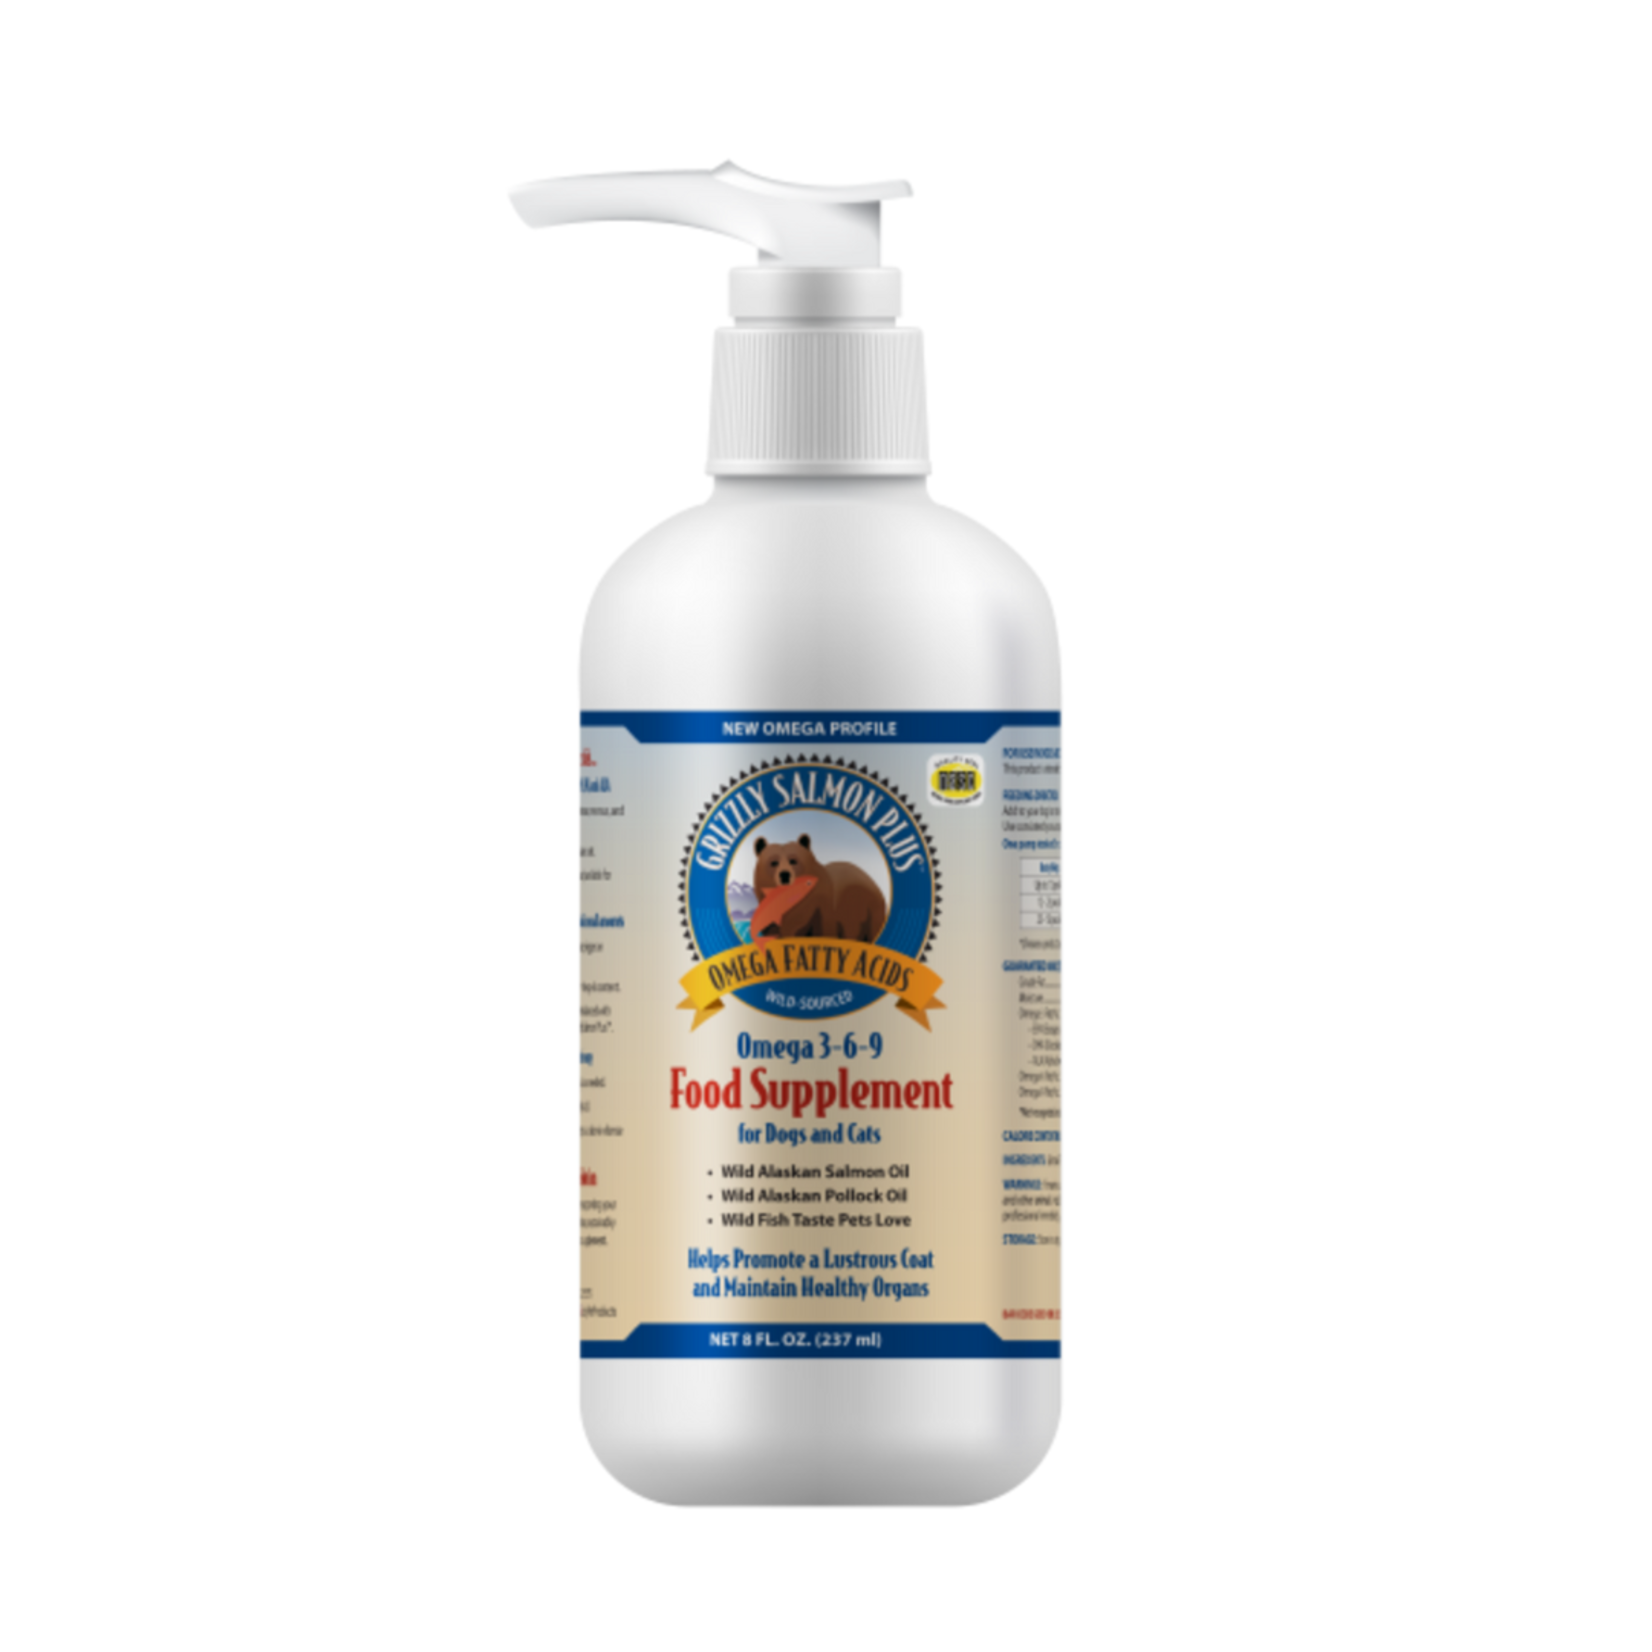 Grizzly Salmon Plus Grizzly Salmon Plus Oil Liquid Supplement For Dog  8oz